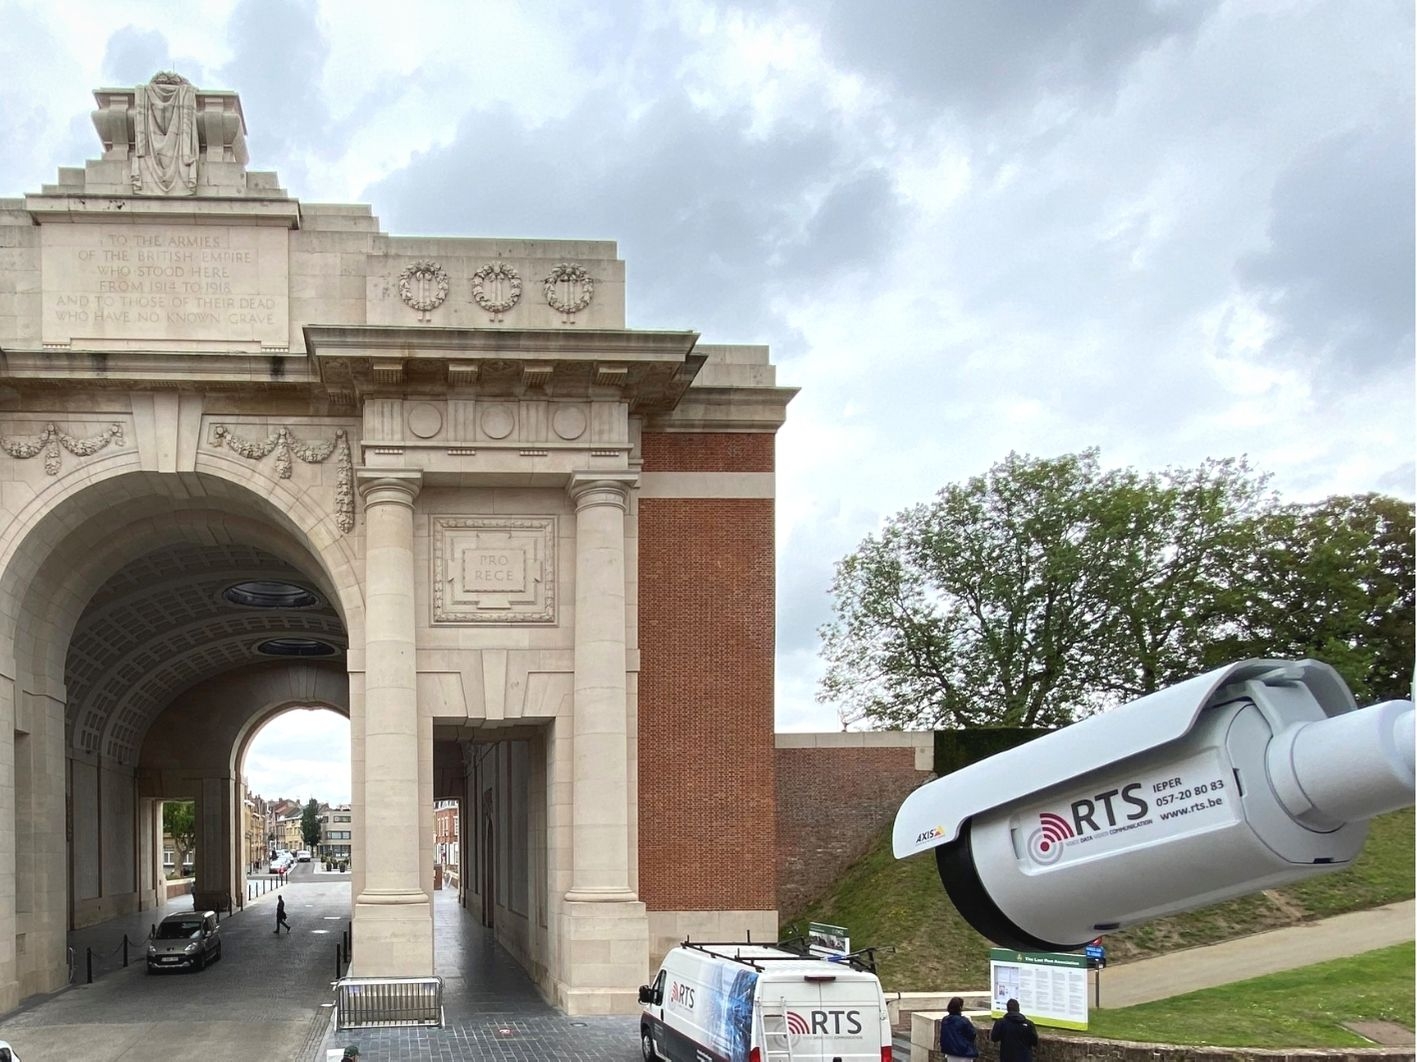 Camera at the Menin Gate in Ypres